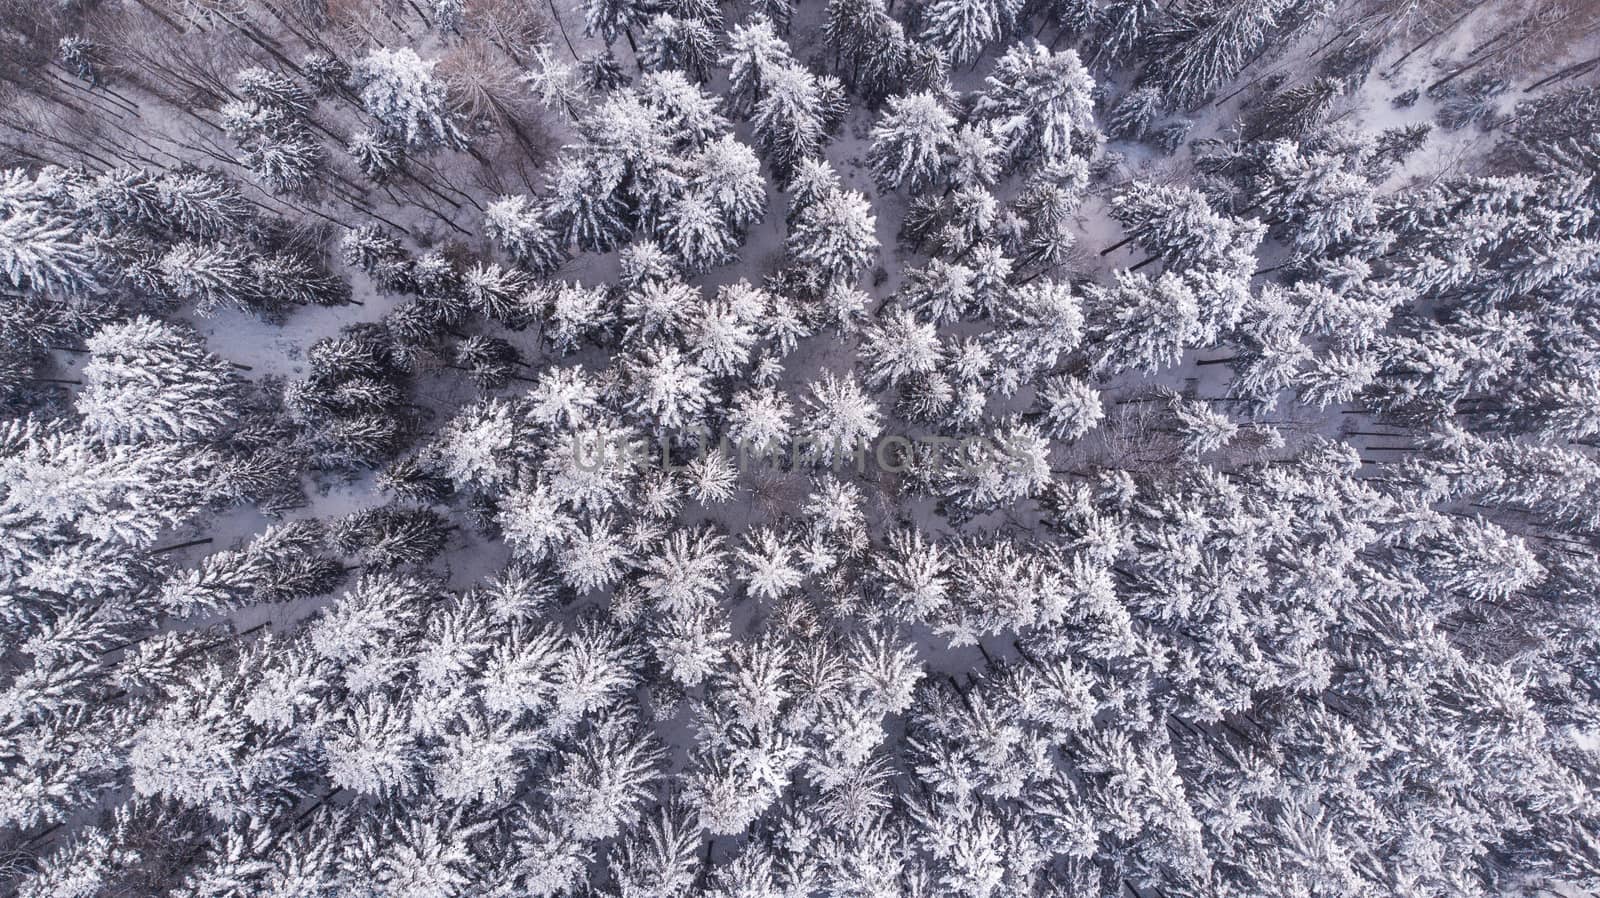 Snow Covered Pine Forest at Winter, Aerial Drone Top Down View.